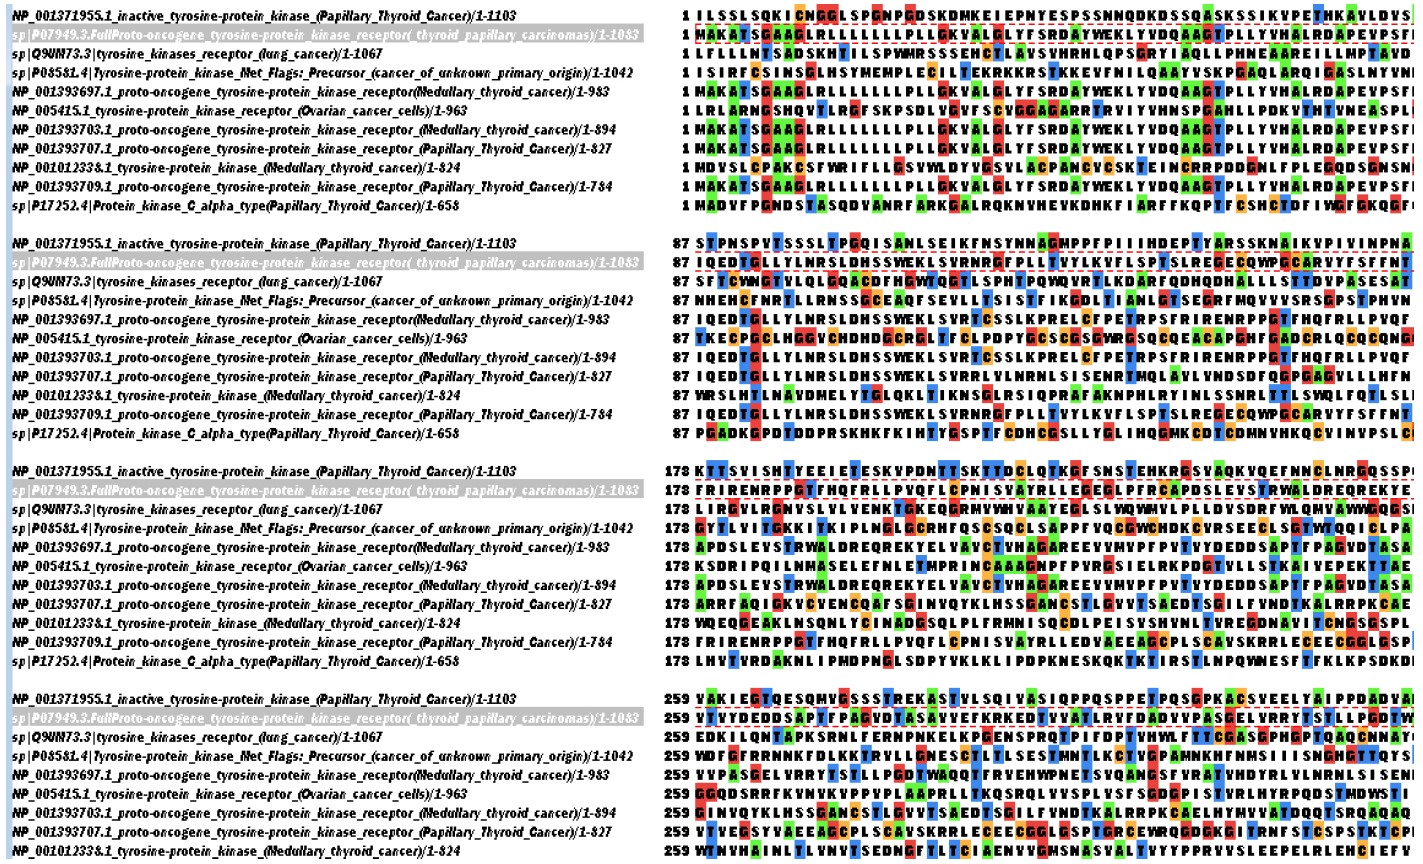 Image for - In silico Analysis of Tyrosine Kinases Receptor in Papillary and Medullary Thyroid Cancer Using Sequence-alignment-based Methods